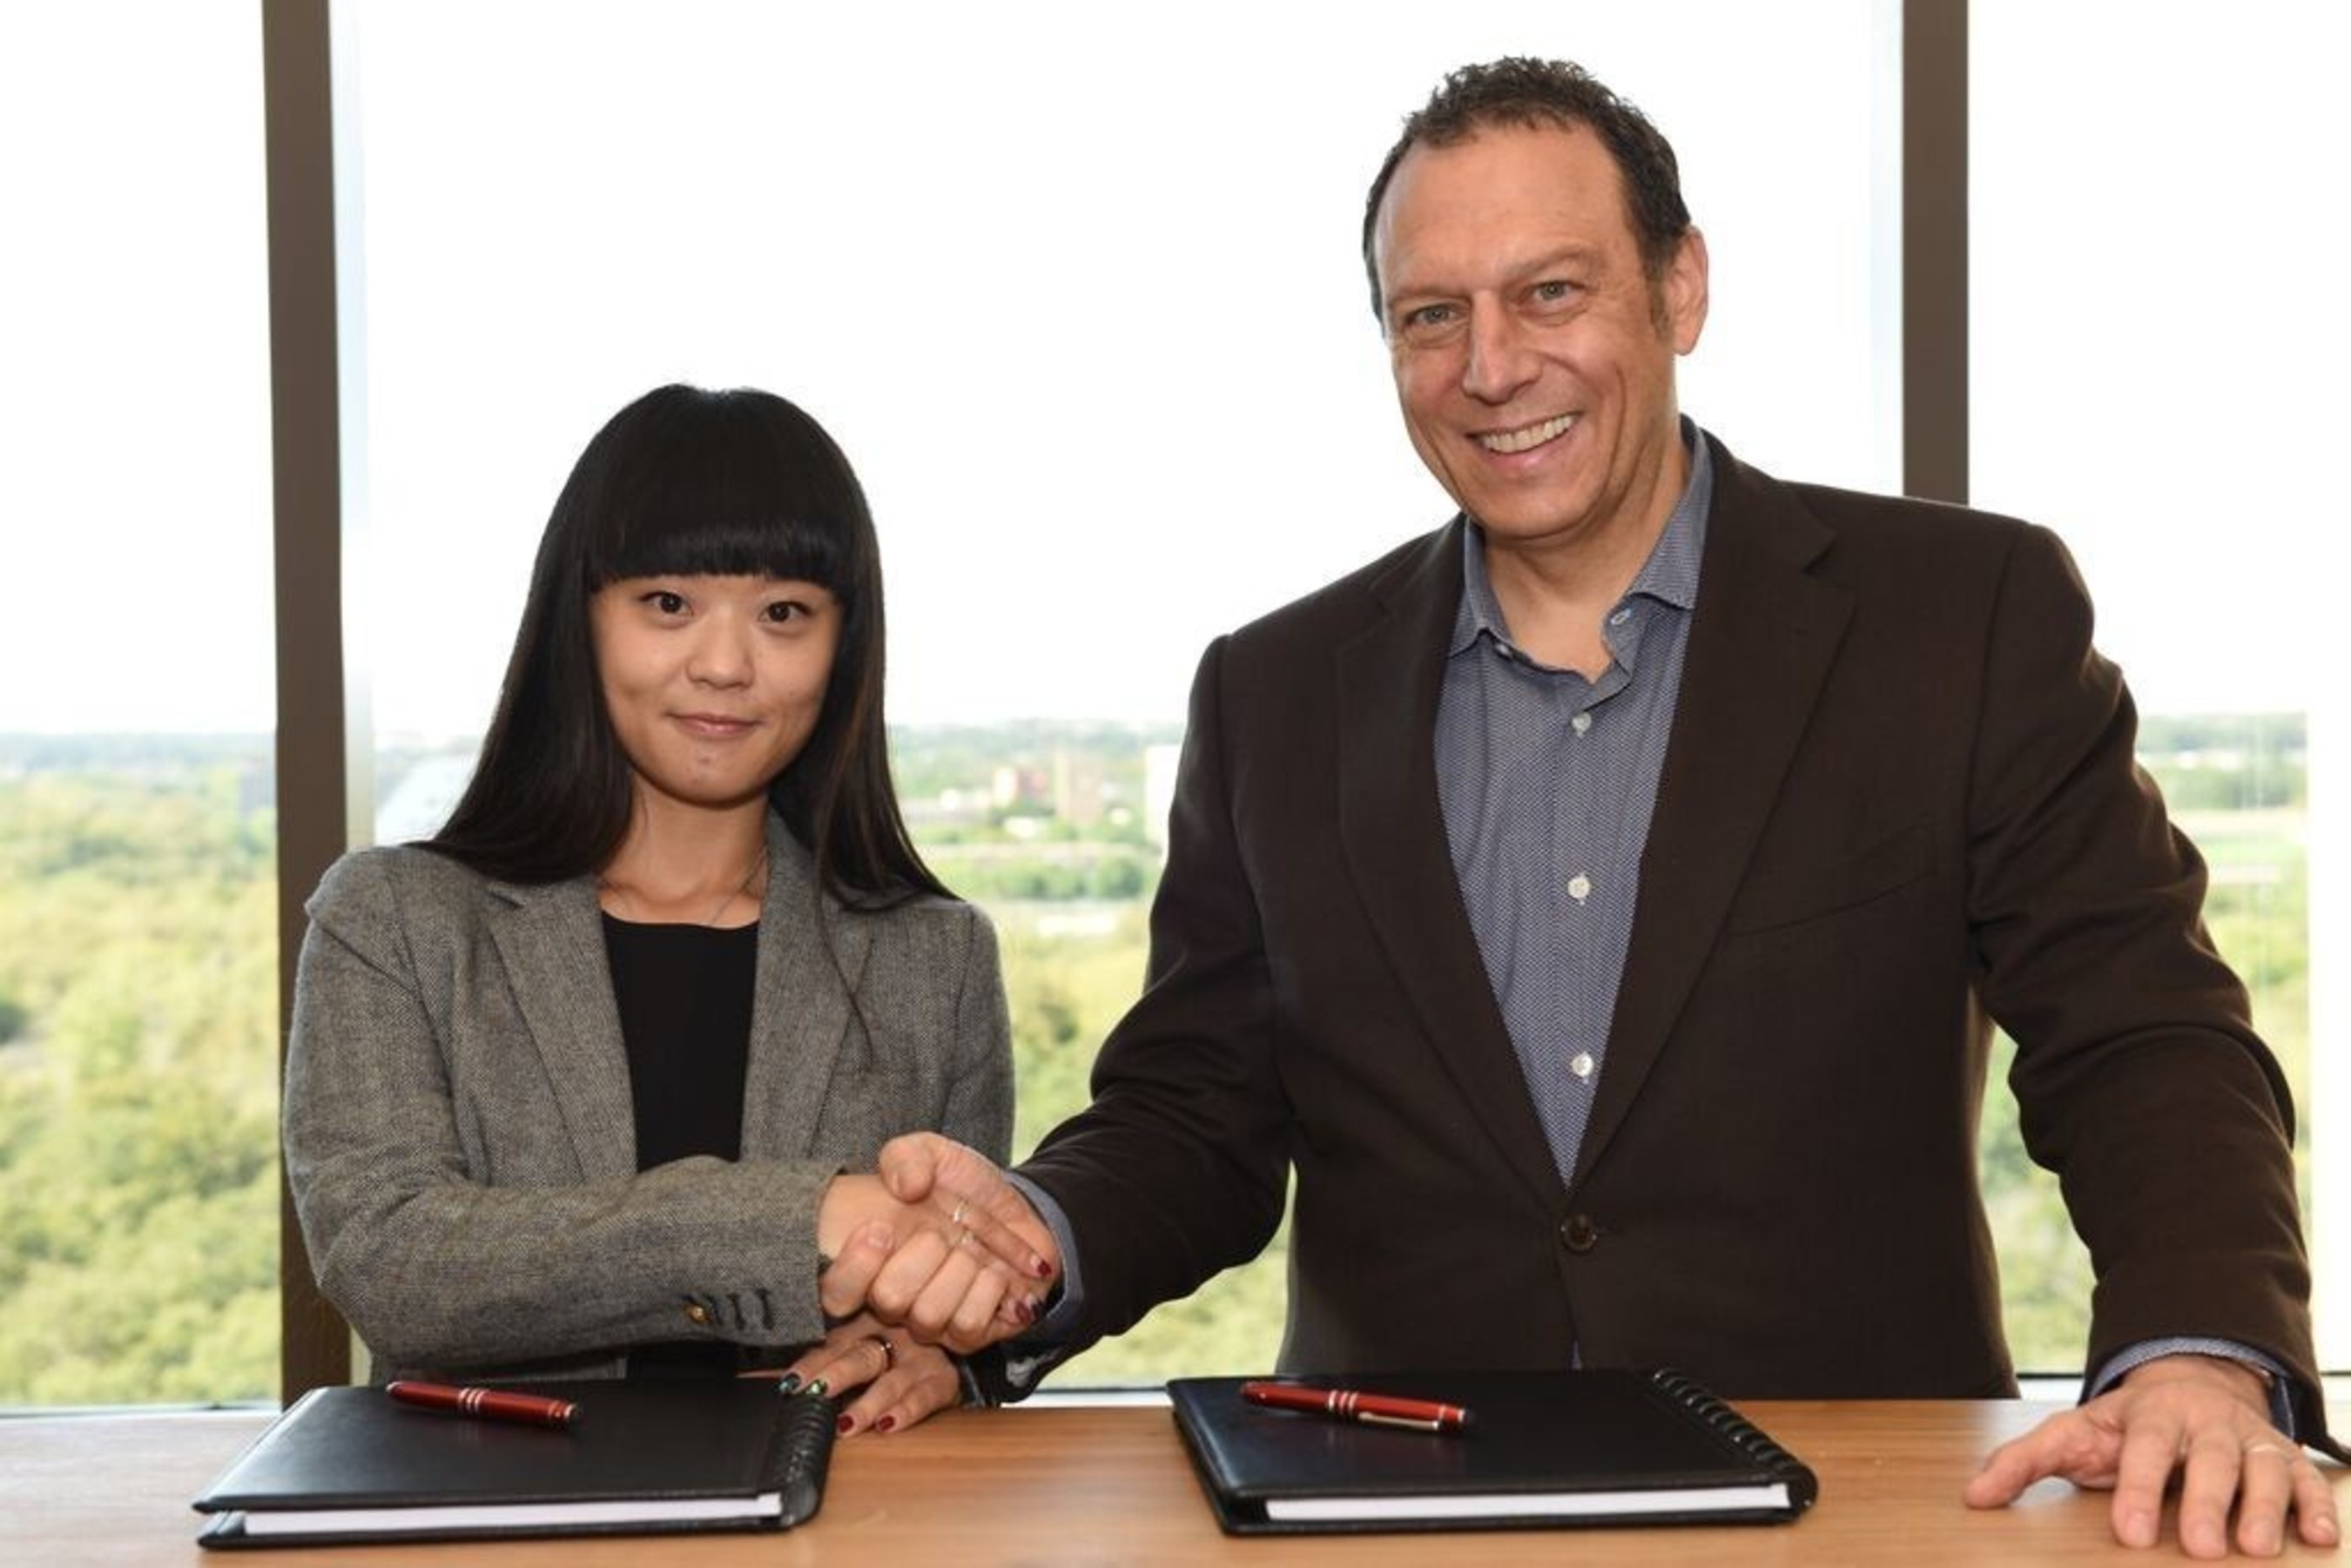 Feng Na, COO of Shijie99 with Sabre president and CEO Tom Klein at Sabre's global headquarters in Southlake, Texas, USA